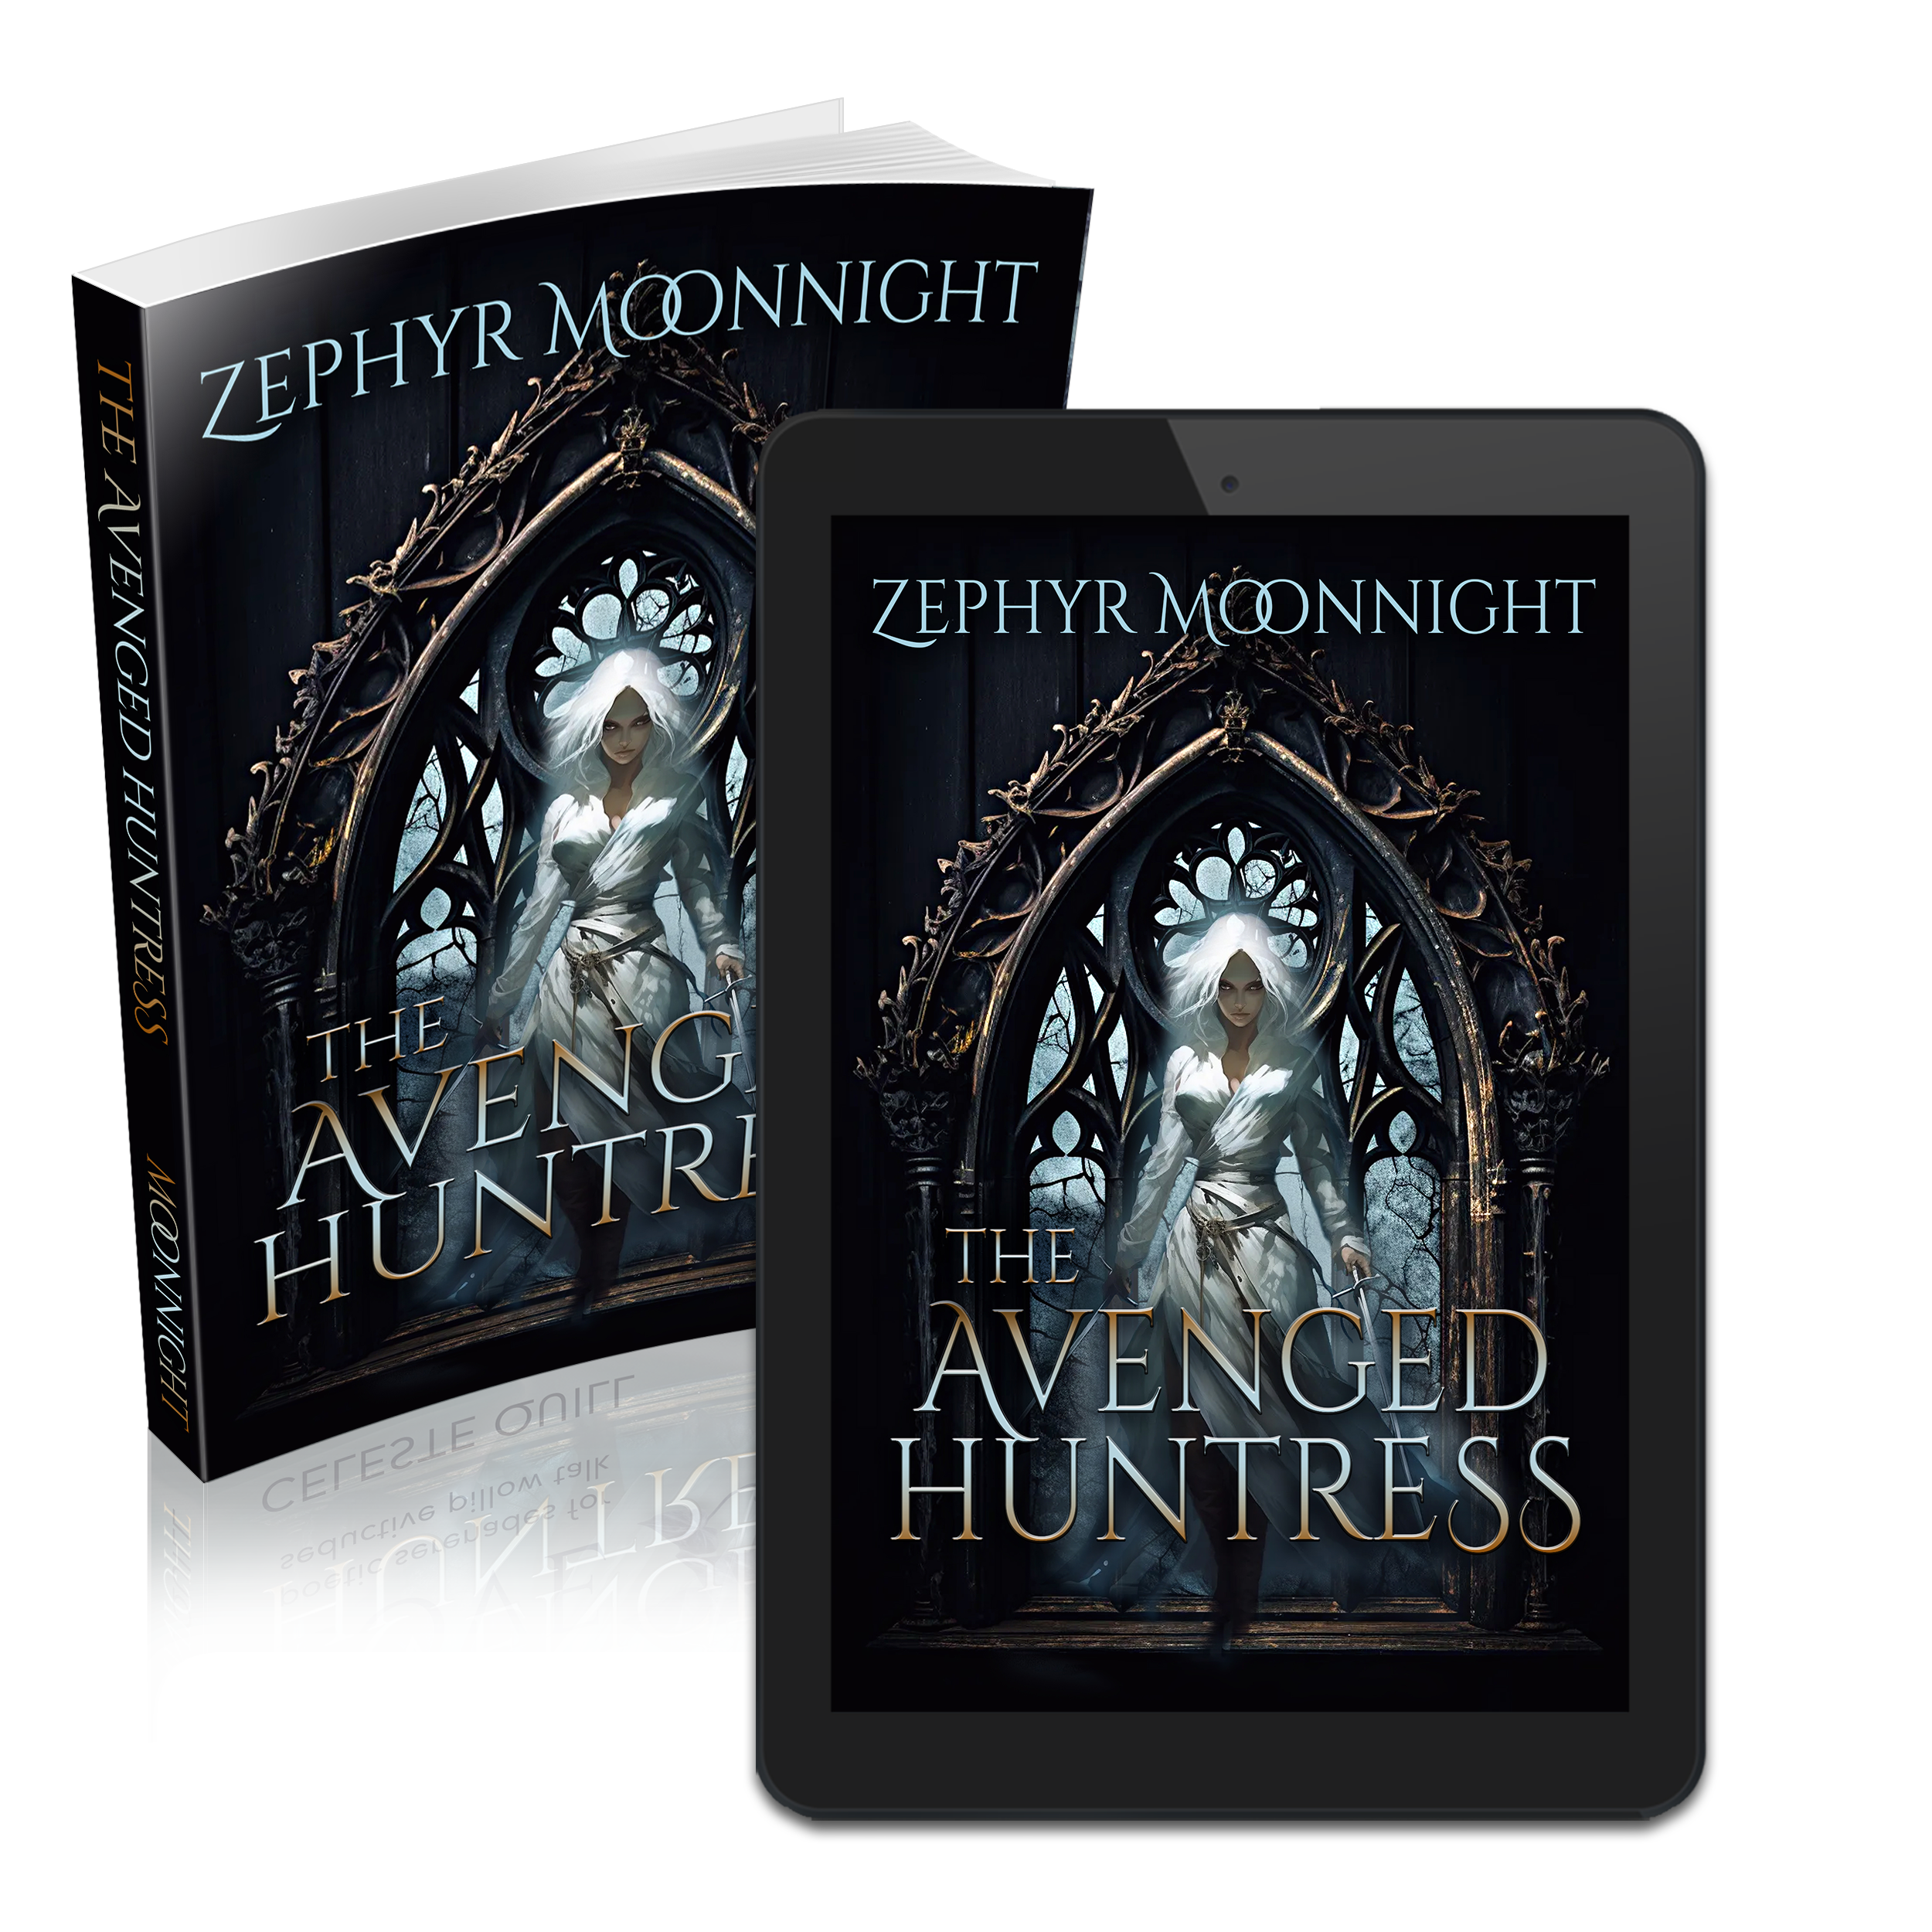 the avenged huntress - premade cover